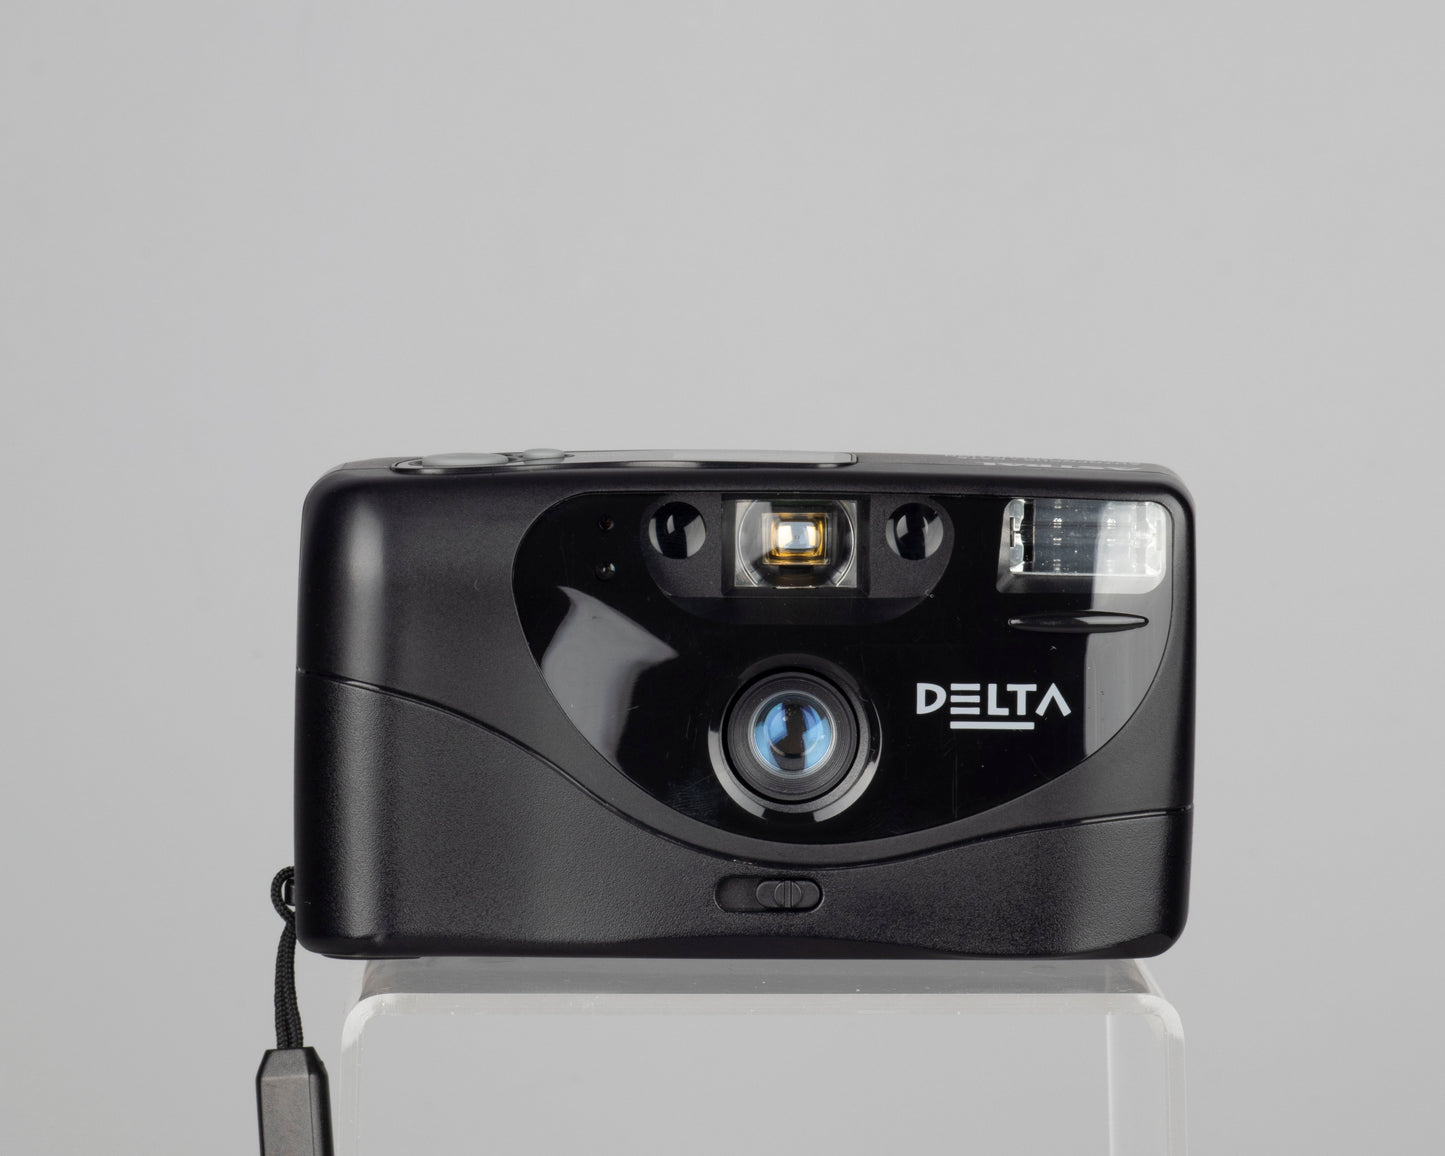 The Astral Delta: a Canadian 35mm autofocus point-and-shoot camera from the 1990s